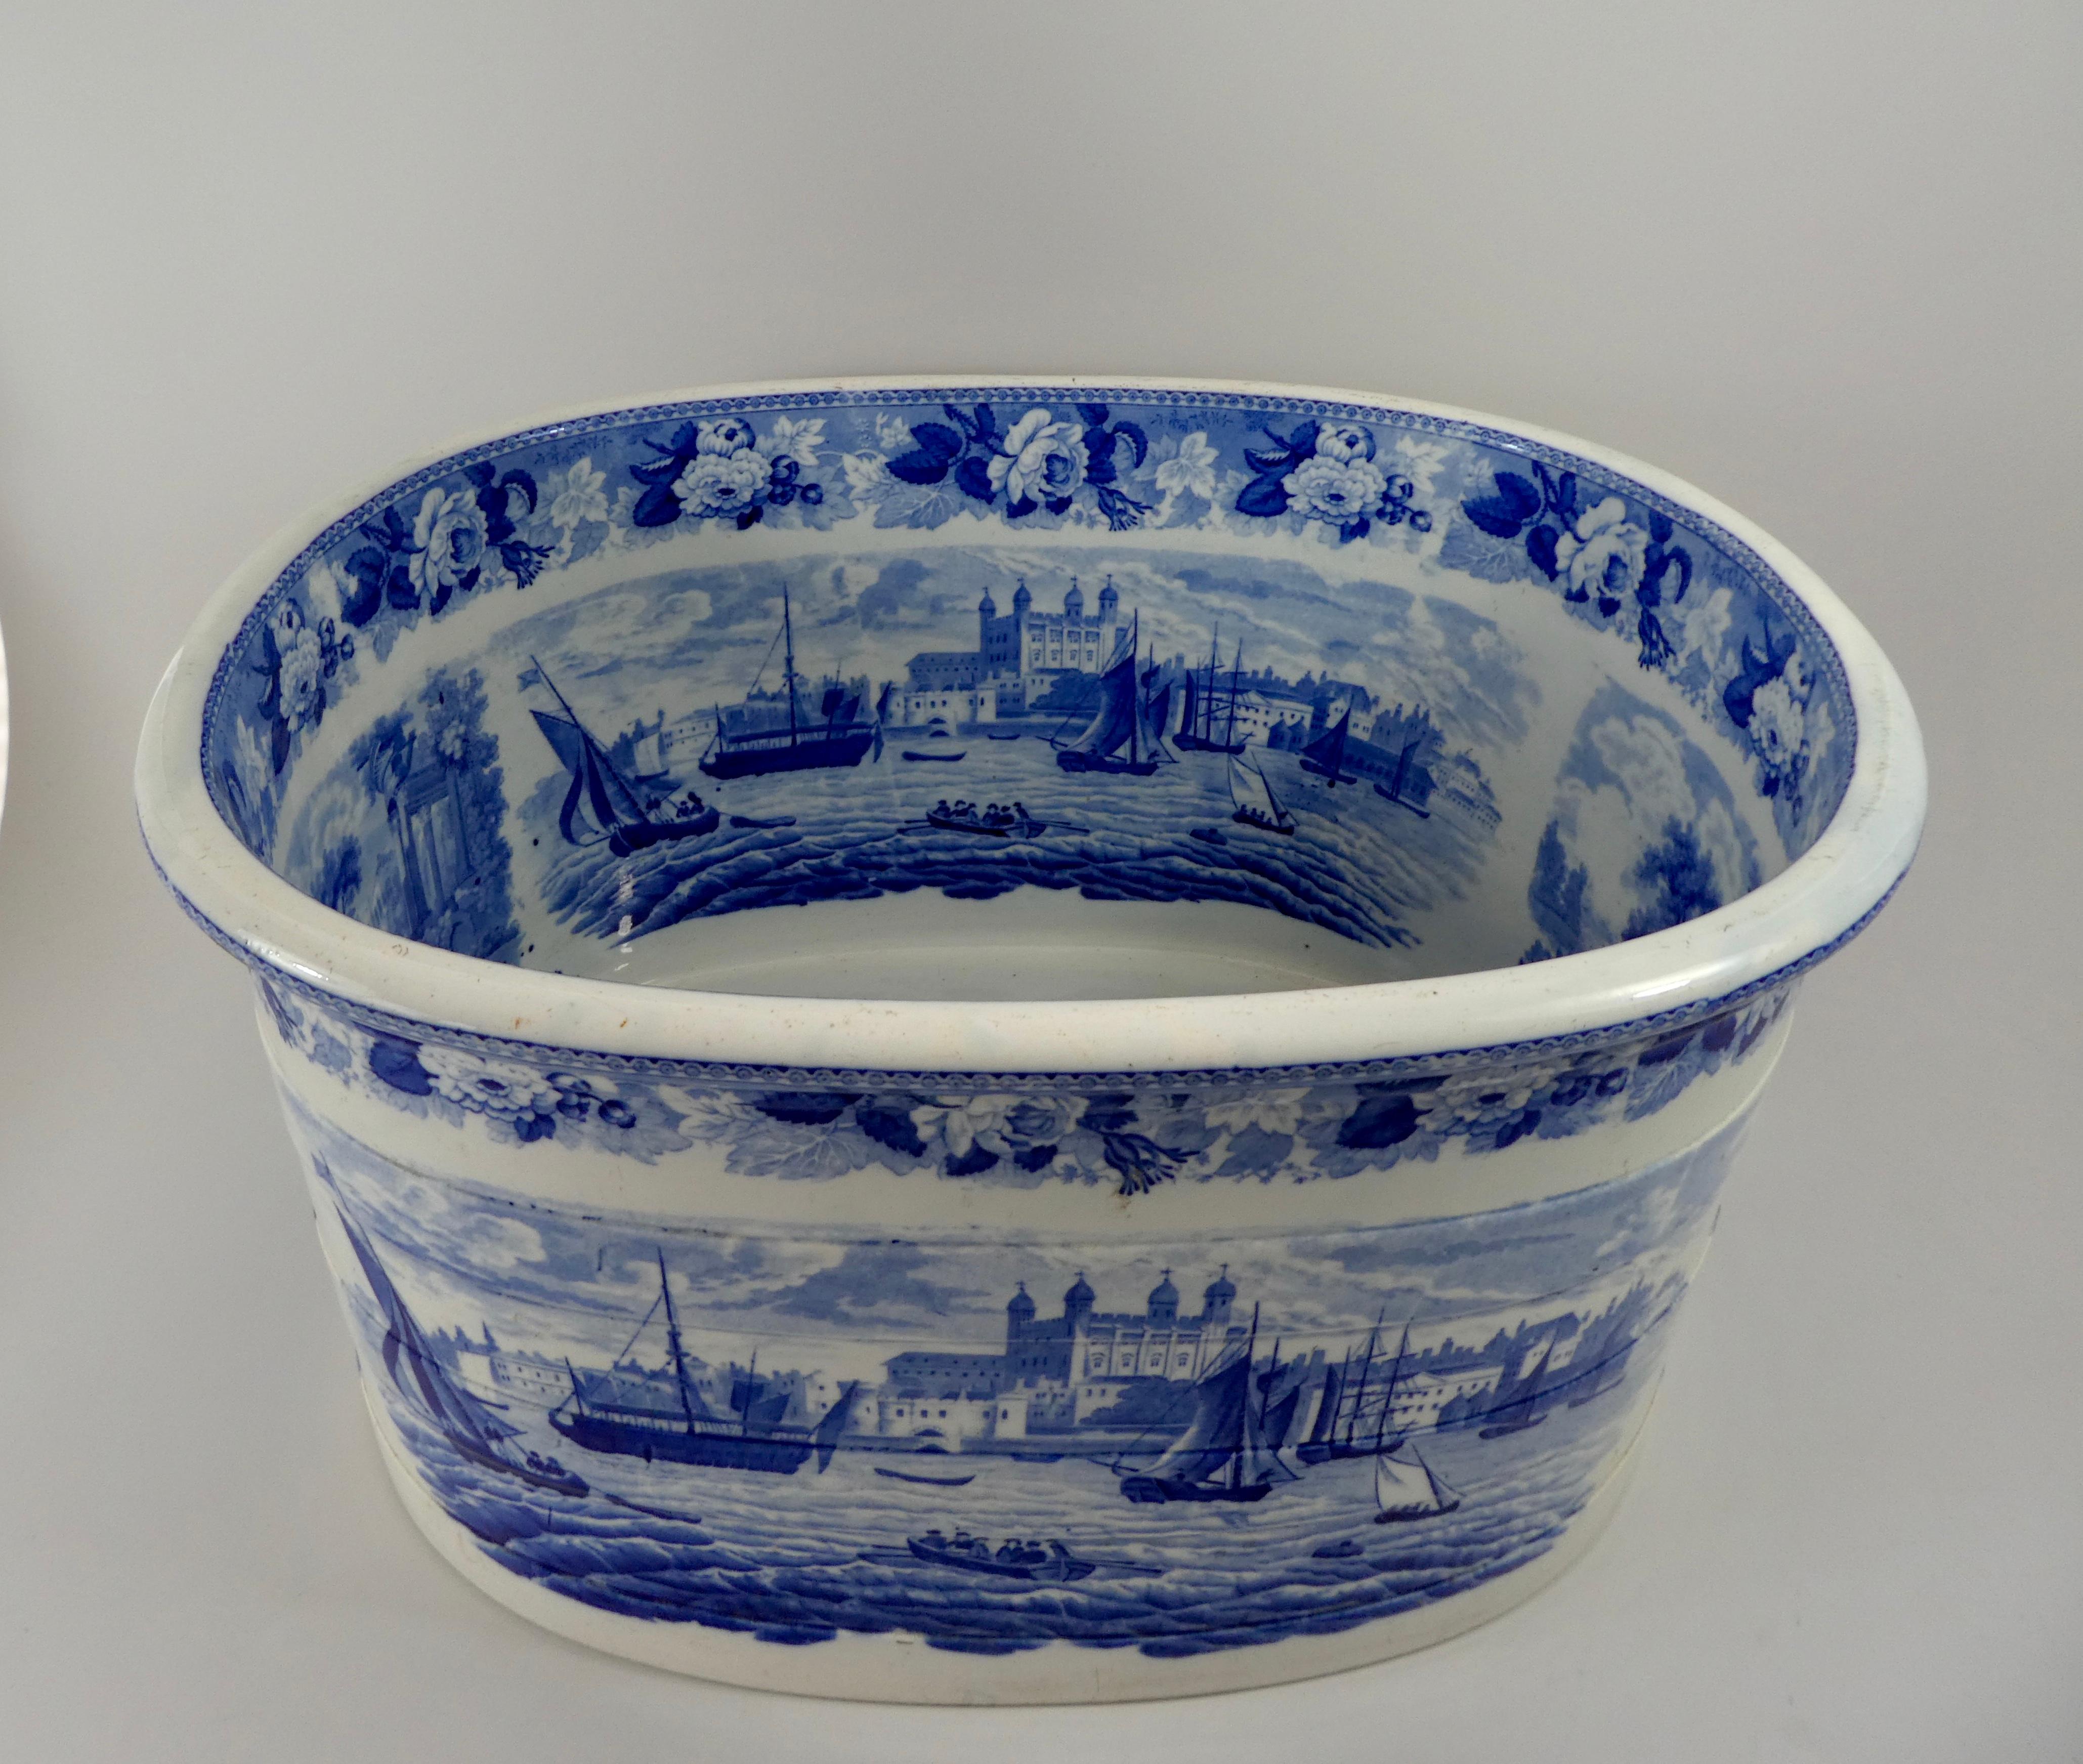 Georgian Wedgwood Pottery Foot Bath. ‘Tower of London from the Thames’, circa 1820